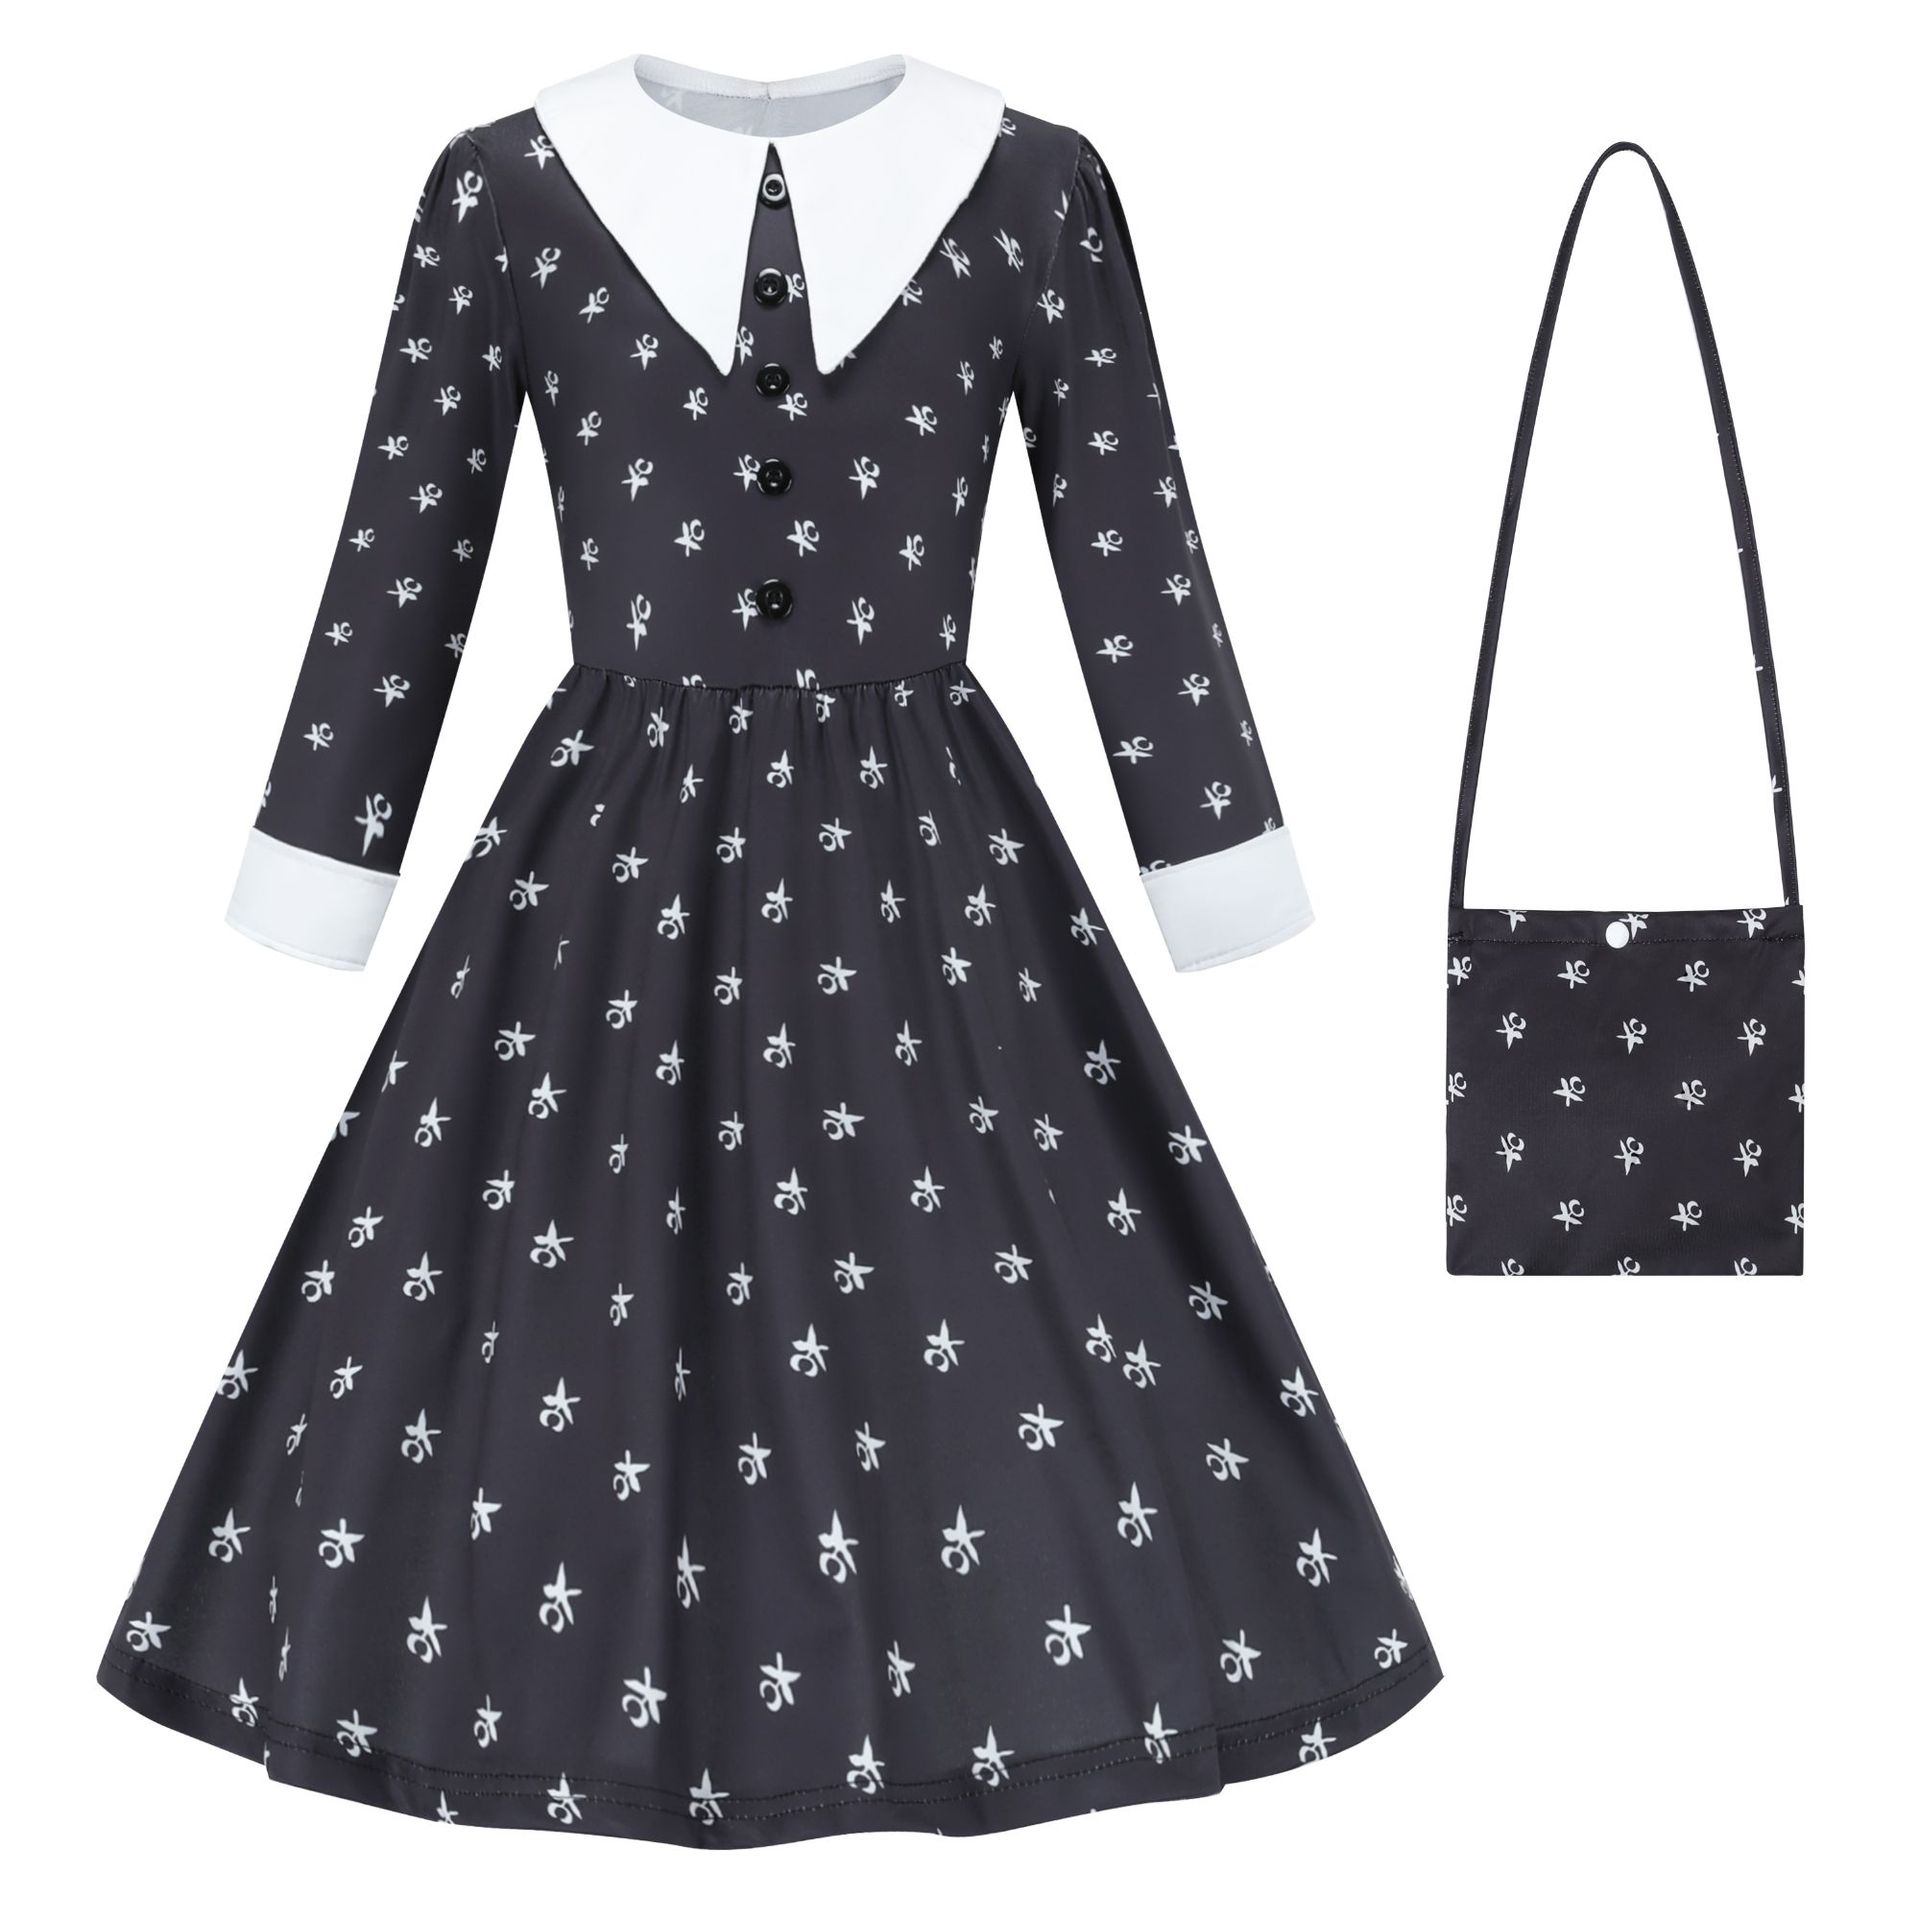 Enchanting Wednesday Addams Dress for Girls - Long Sleeve Cosplay Gown